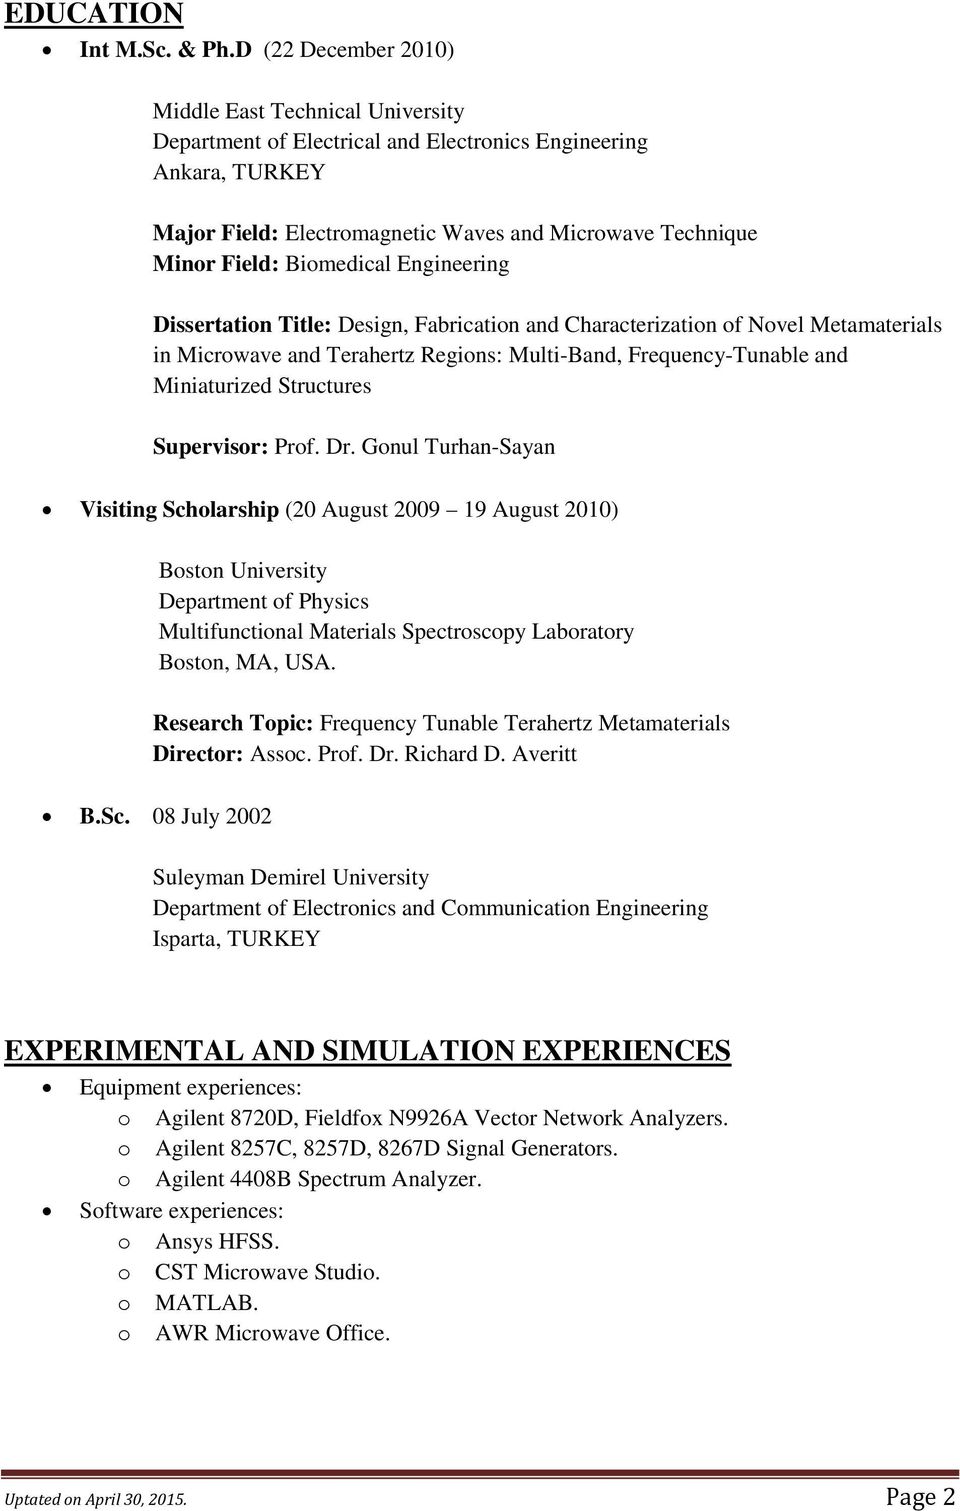 Biomedical Engineering Dissertation Title: Design, Fabrication and Characterization of Novel Metamaterials in Microwave and Terahertz Regions: Multi-Band, Frequency-Tunable and Miniaturized